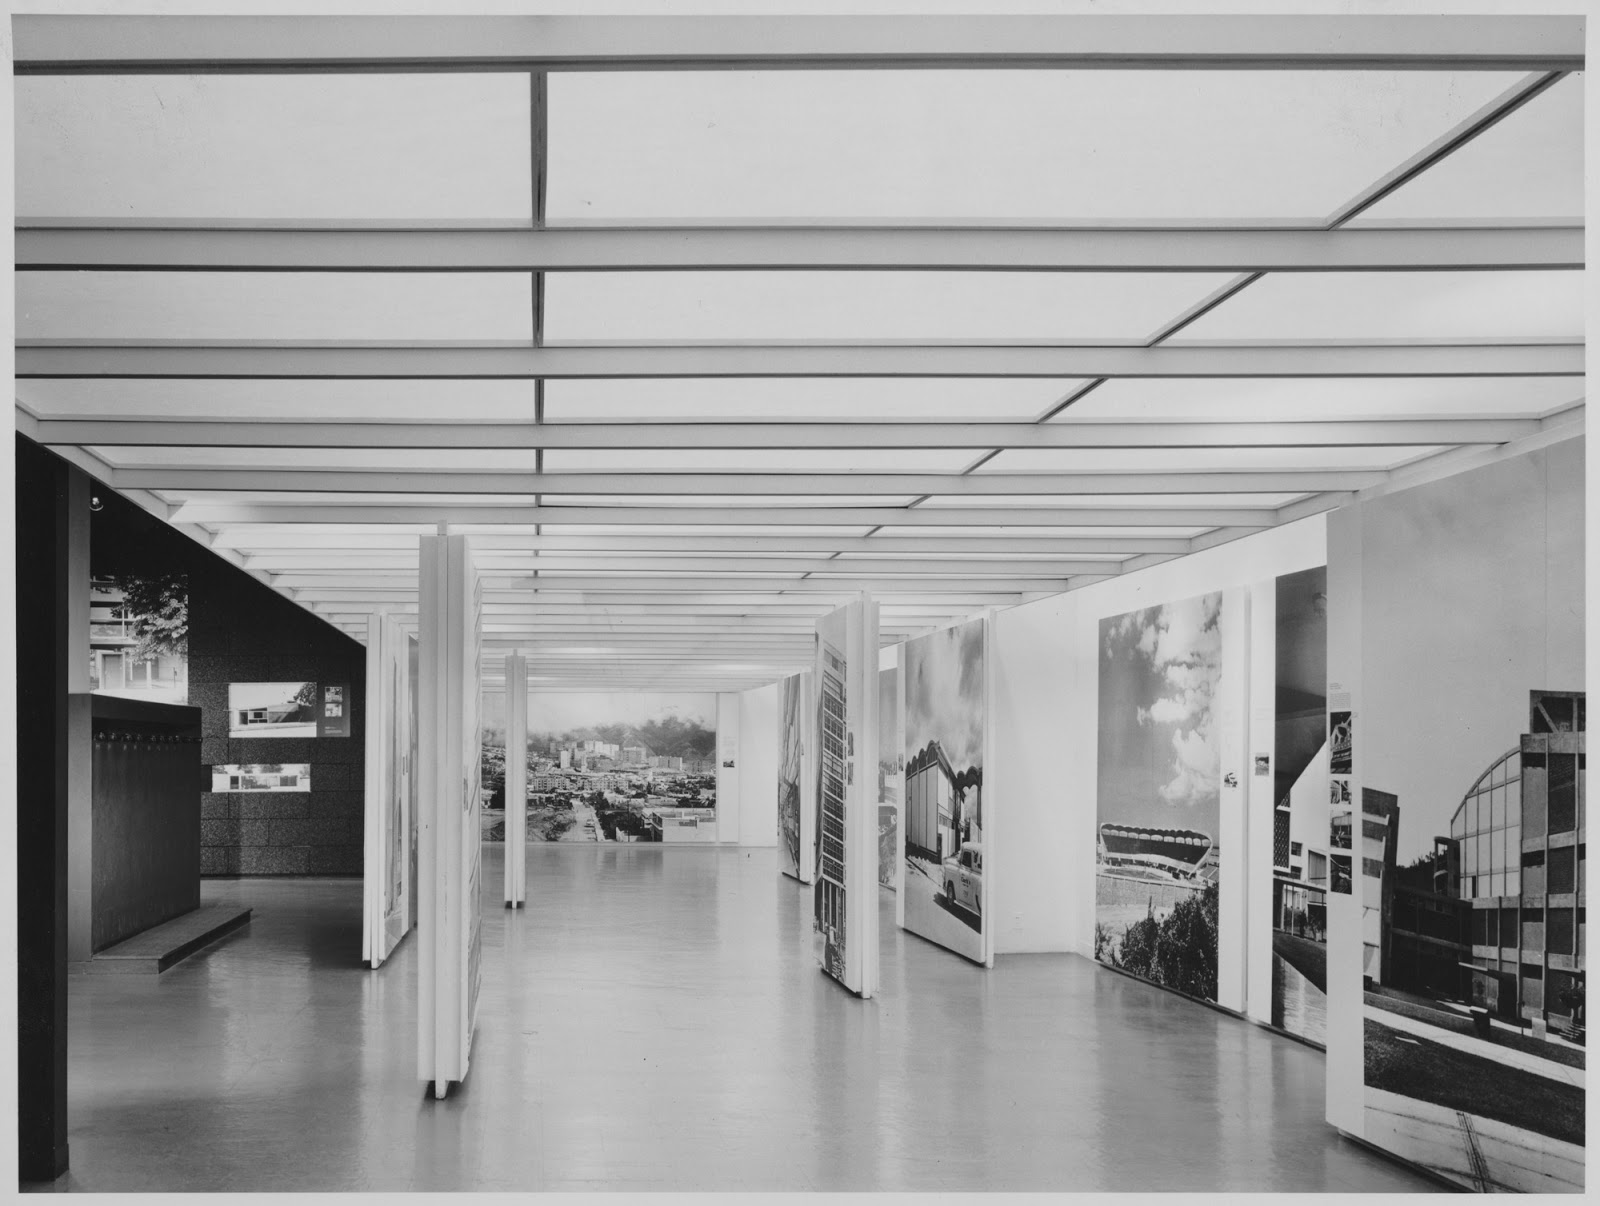 ARTE ARQUITECTURA (ART AND ARCHITECTURE): MoMA launches online history